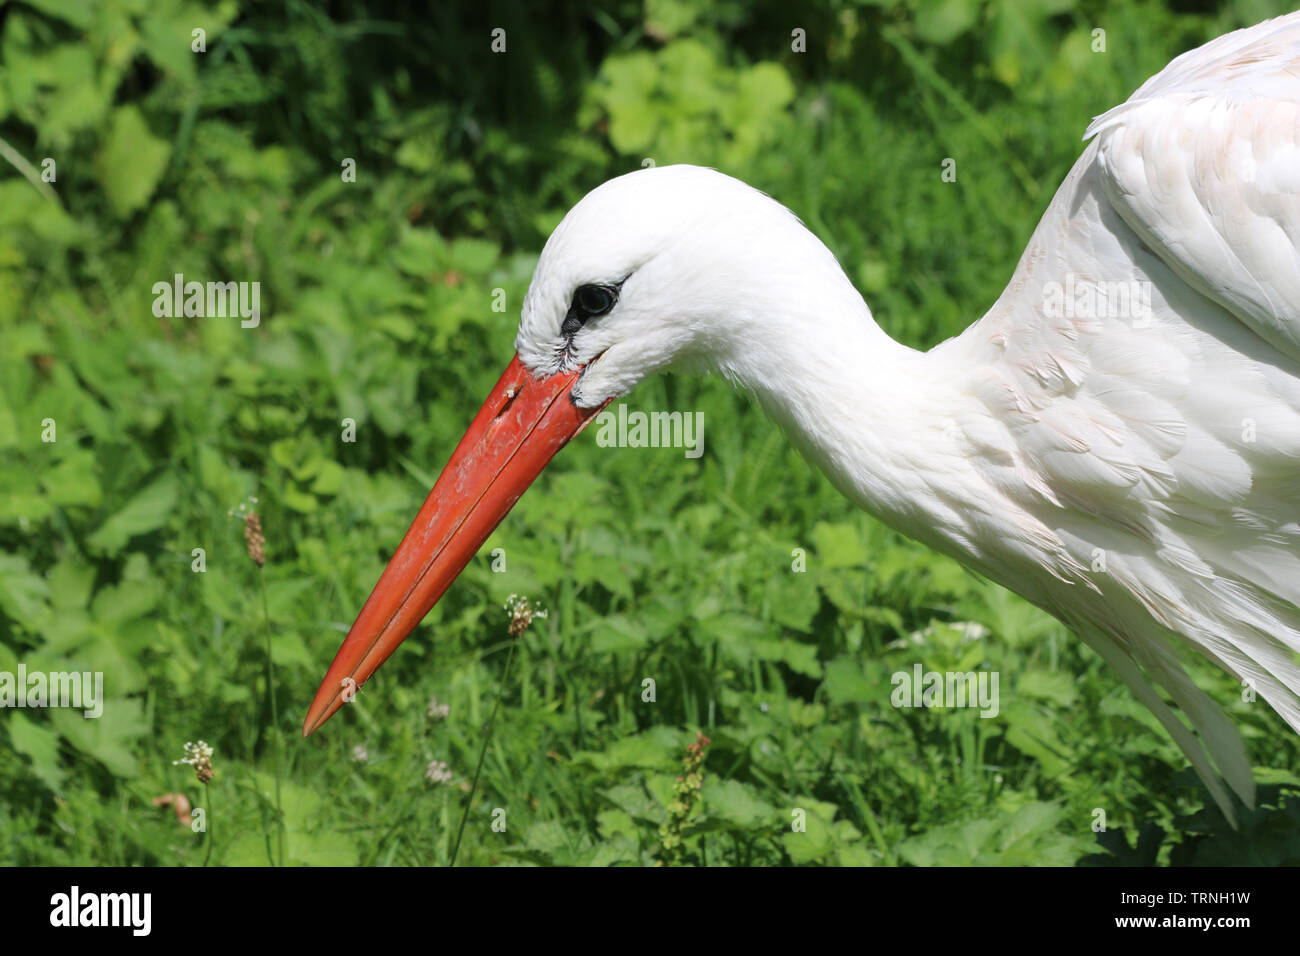 White stork, Ciconia ciconia, head and shoulders facing left ready to pounce and catch prey with a background of blurred leaves and good copy space. Stock Photo